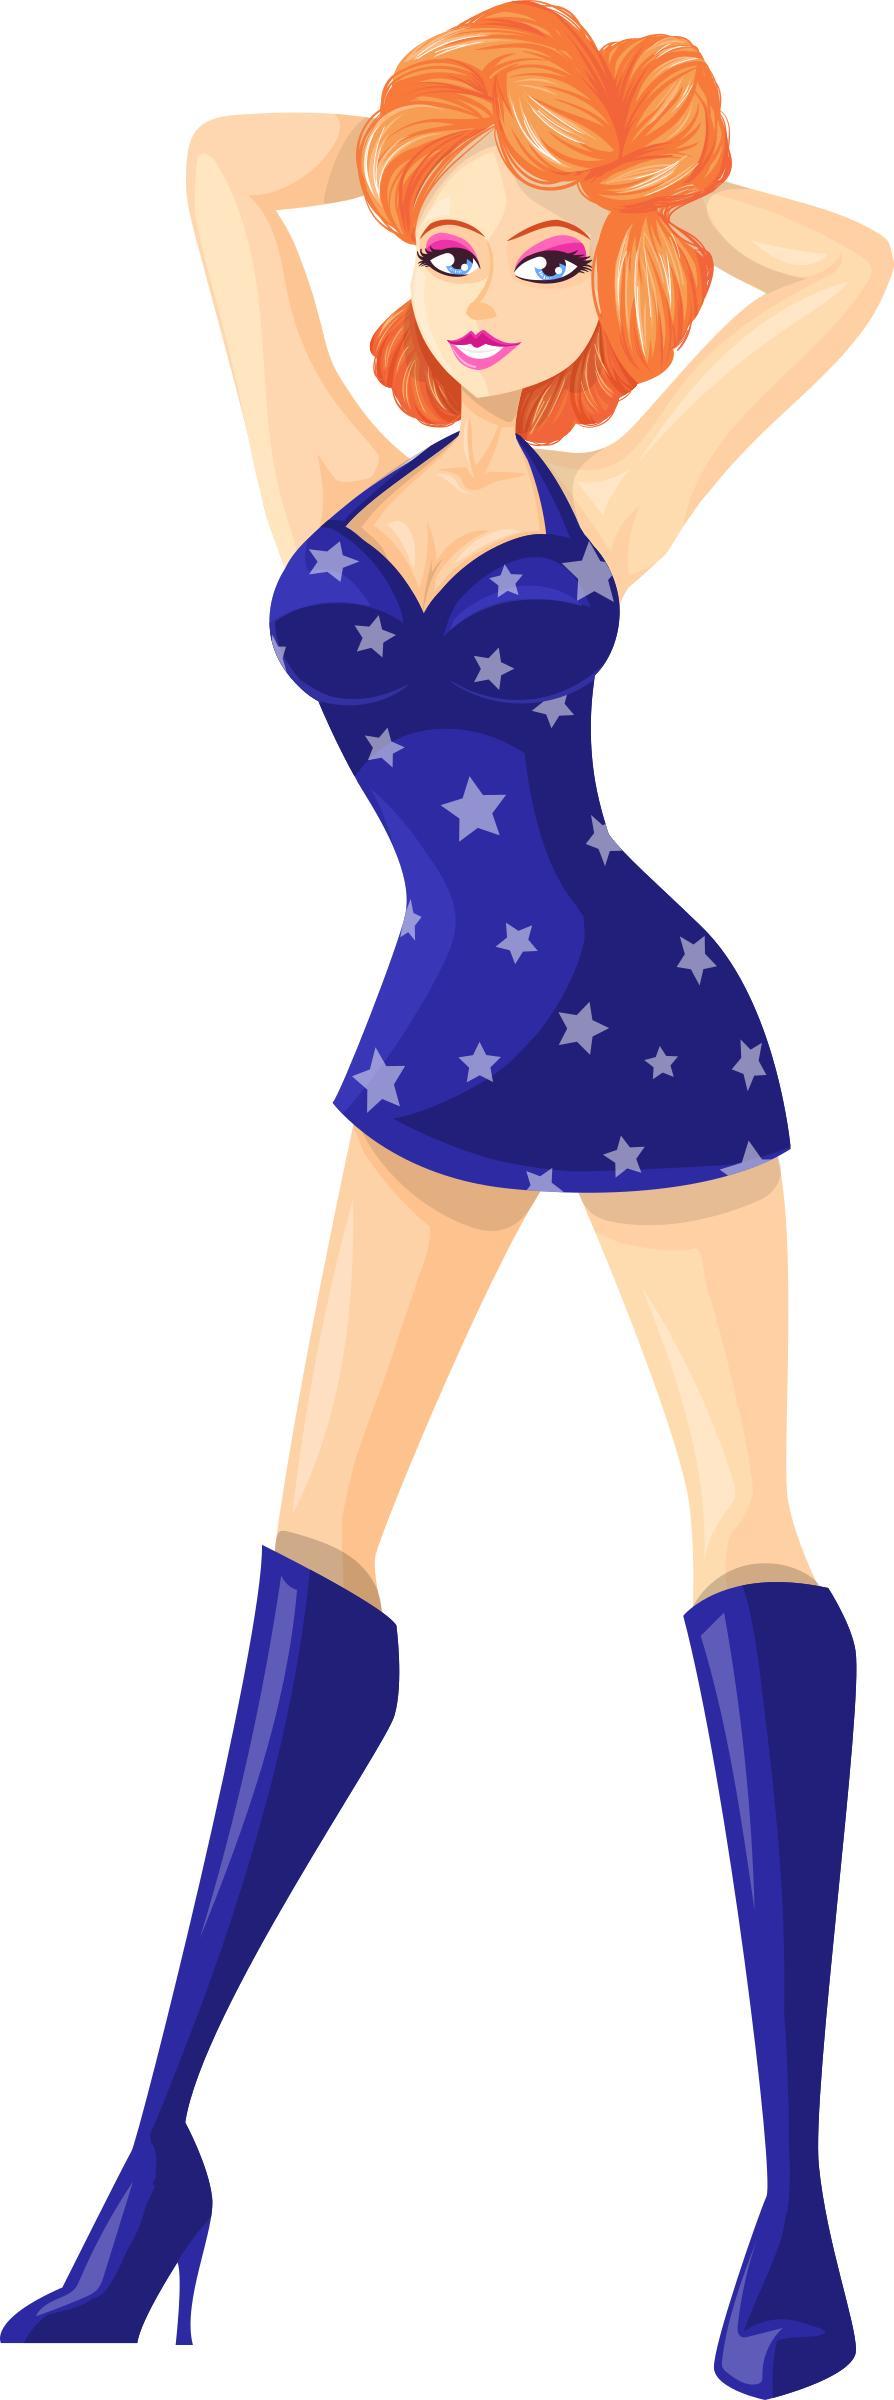 Young lady 2 (redhead, light skin, starry dress #3) png transparent